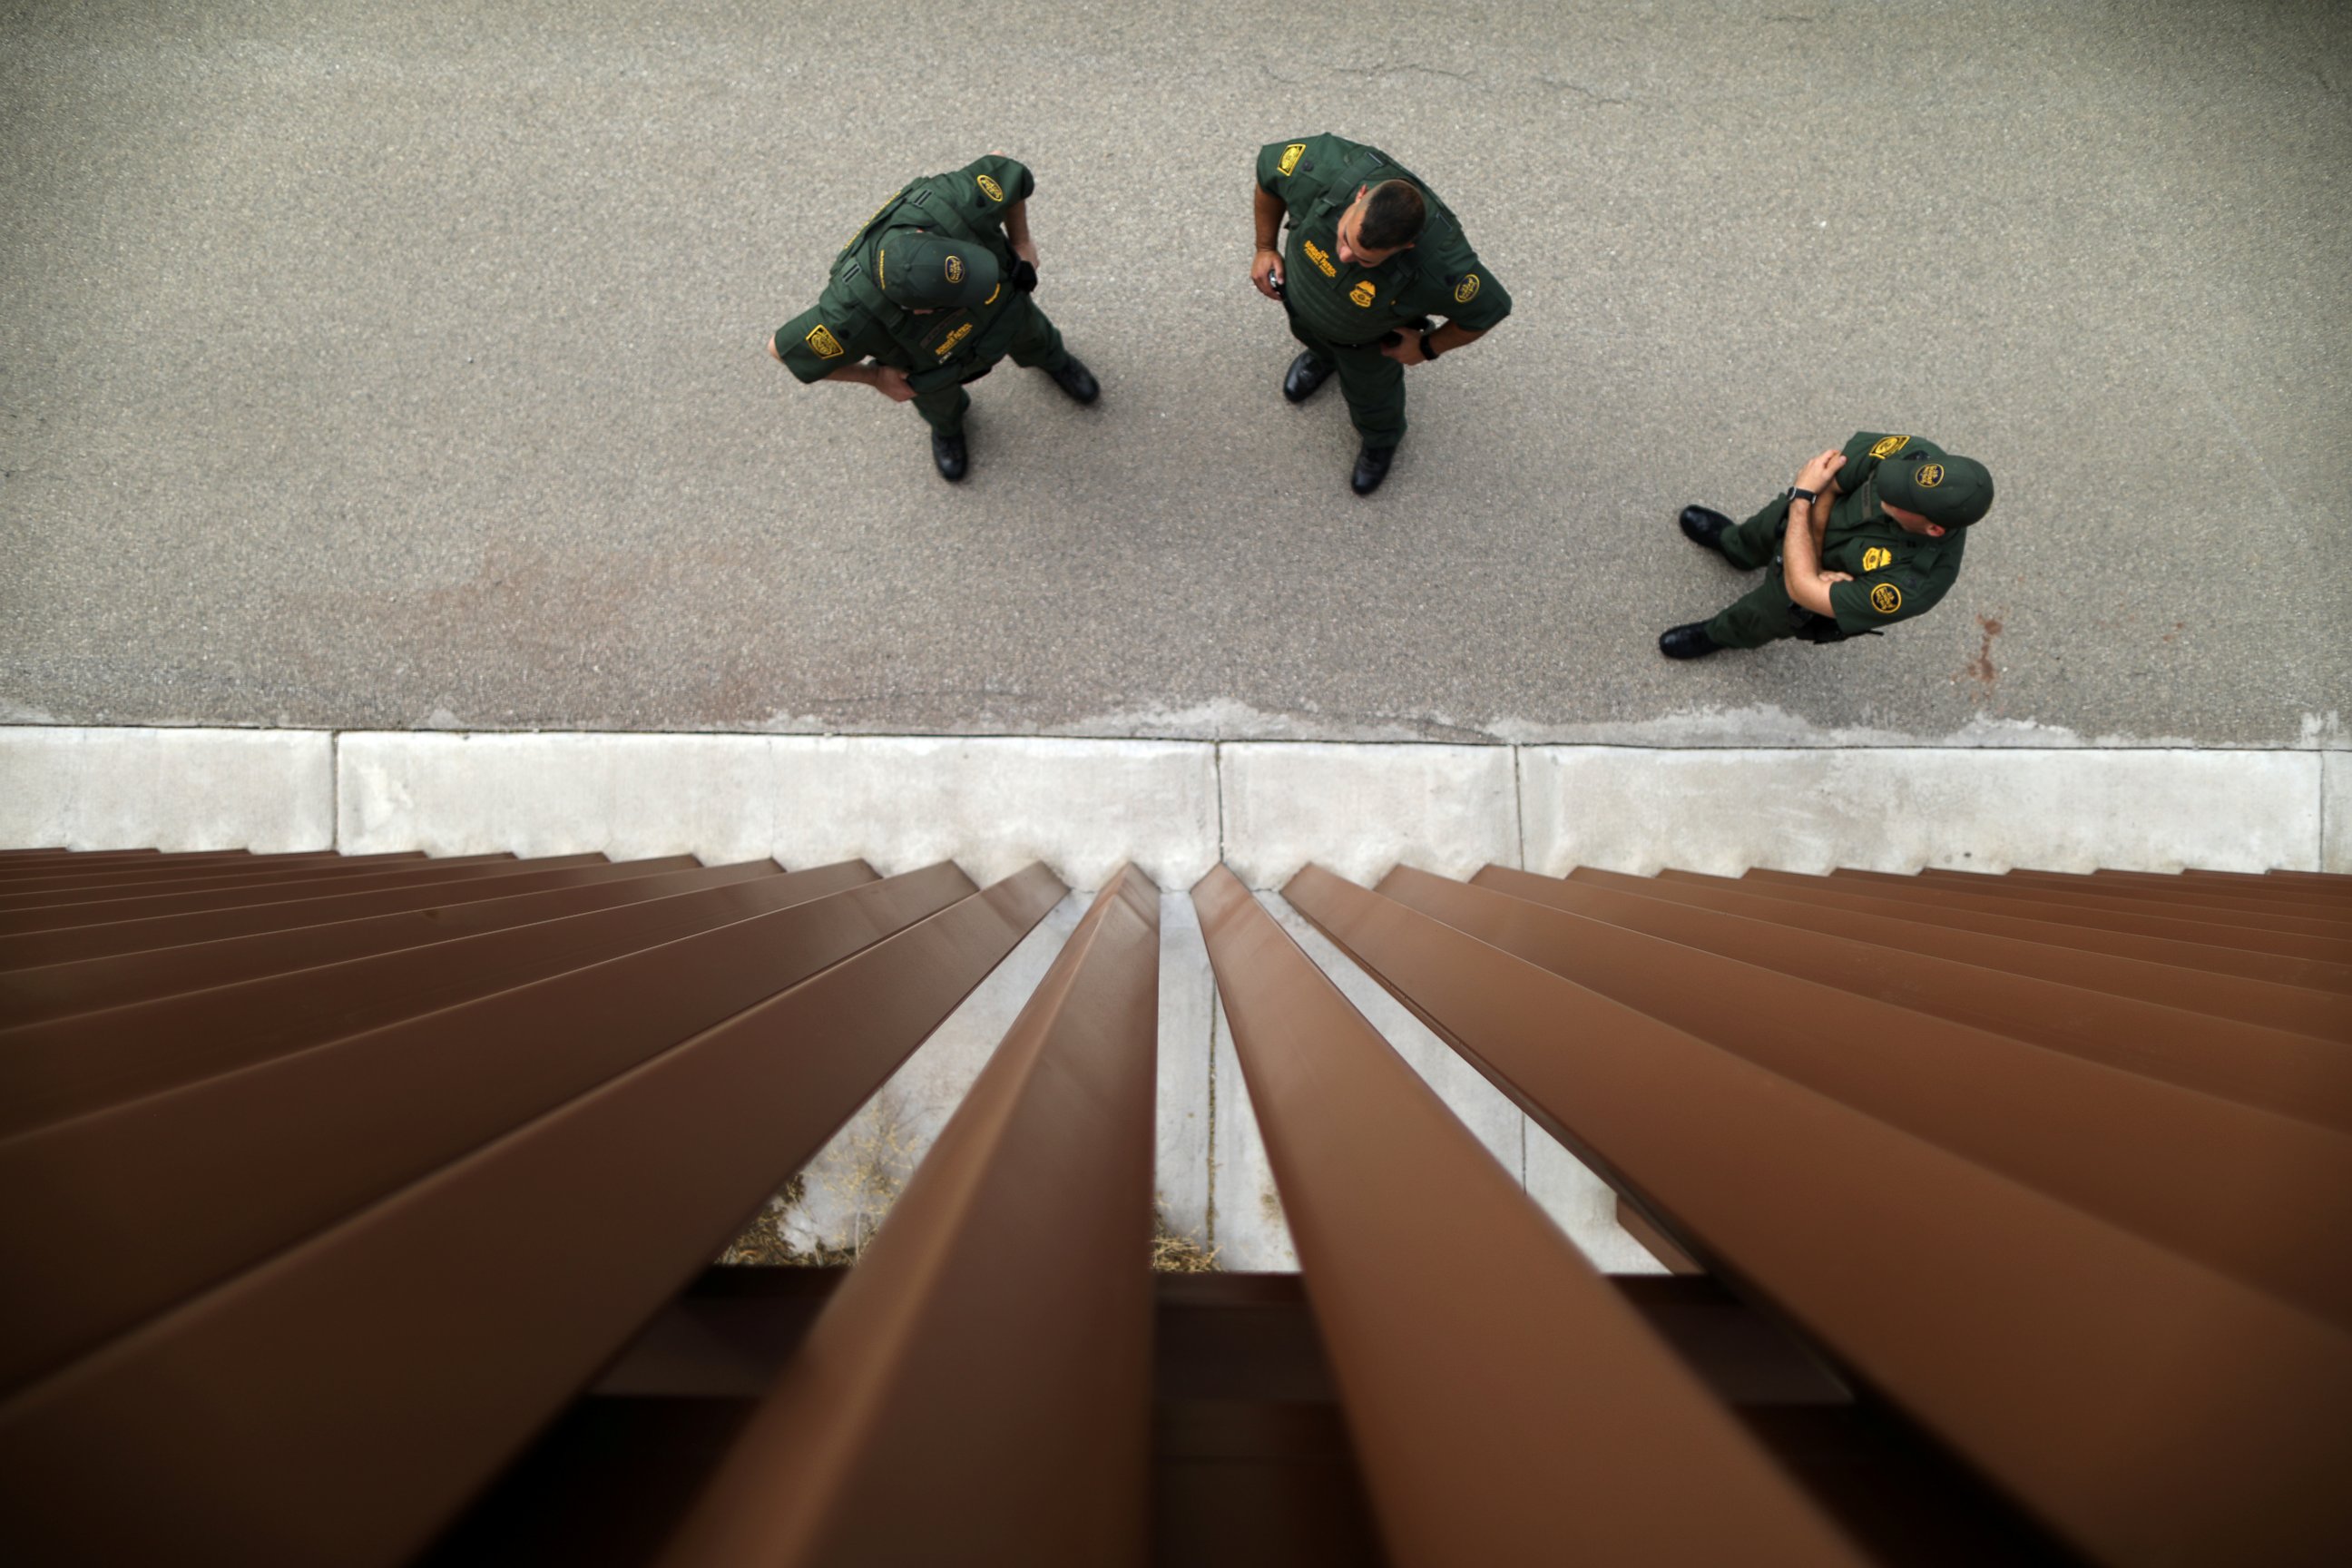 PHOTO: Border patrol agents stand next to a border fence used for training at the United States Border Patrol Academy in Artesia, New Mexico, June 8, 2017.